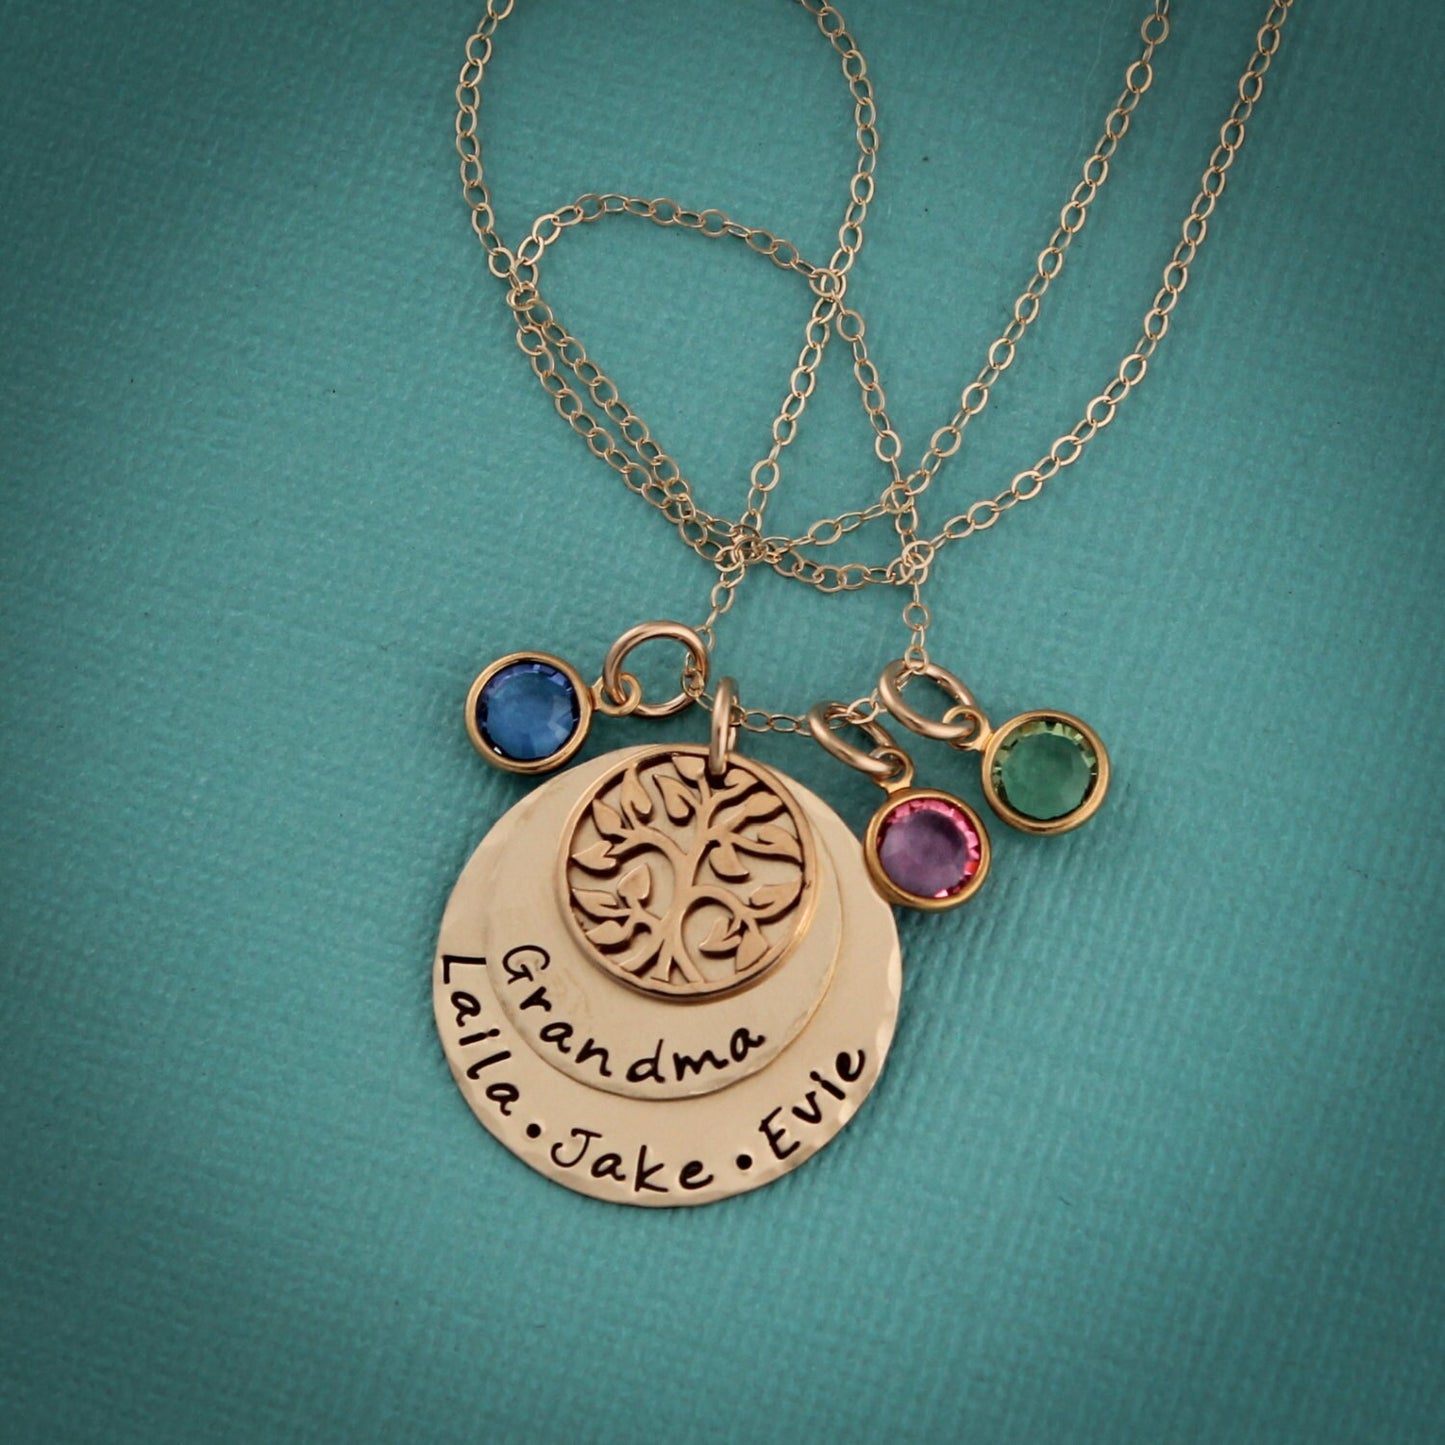 Gold Personalized Grandmother Necklace with Grandchildren Birthstone Grandma Gift Hand Stamped Jewelry Tree of Life Necklace 14K Gold Filled